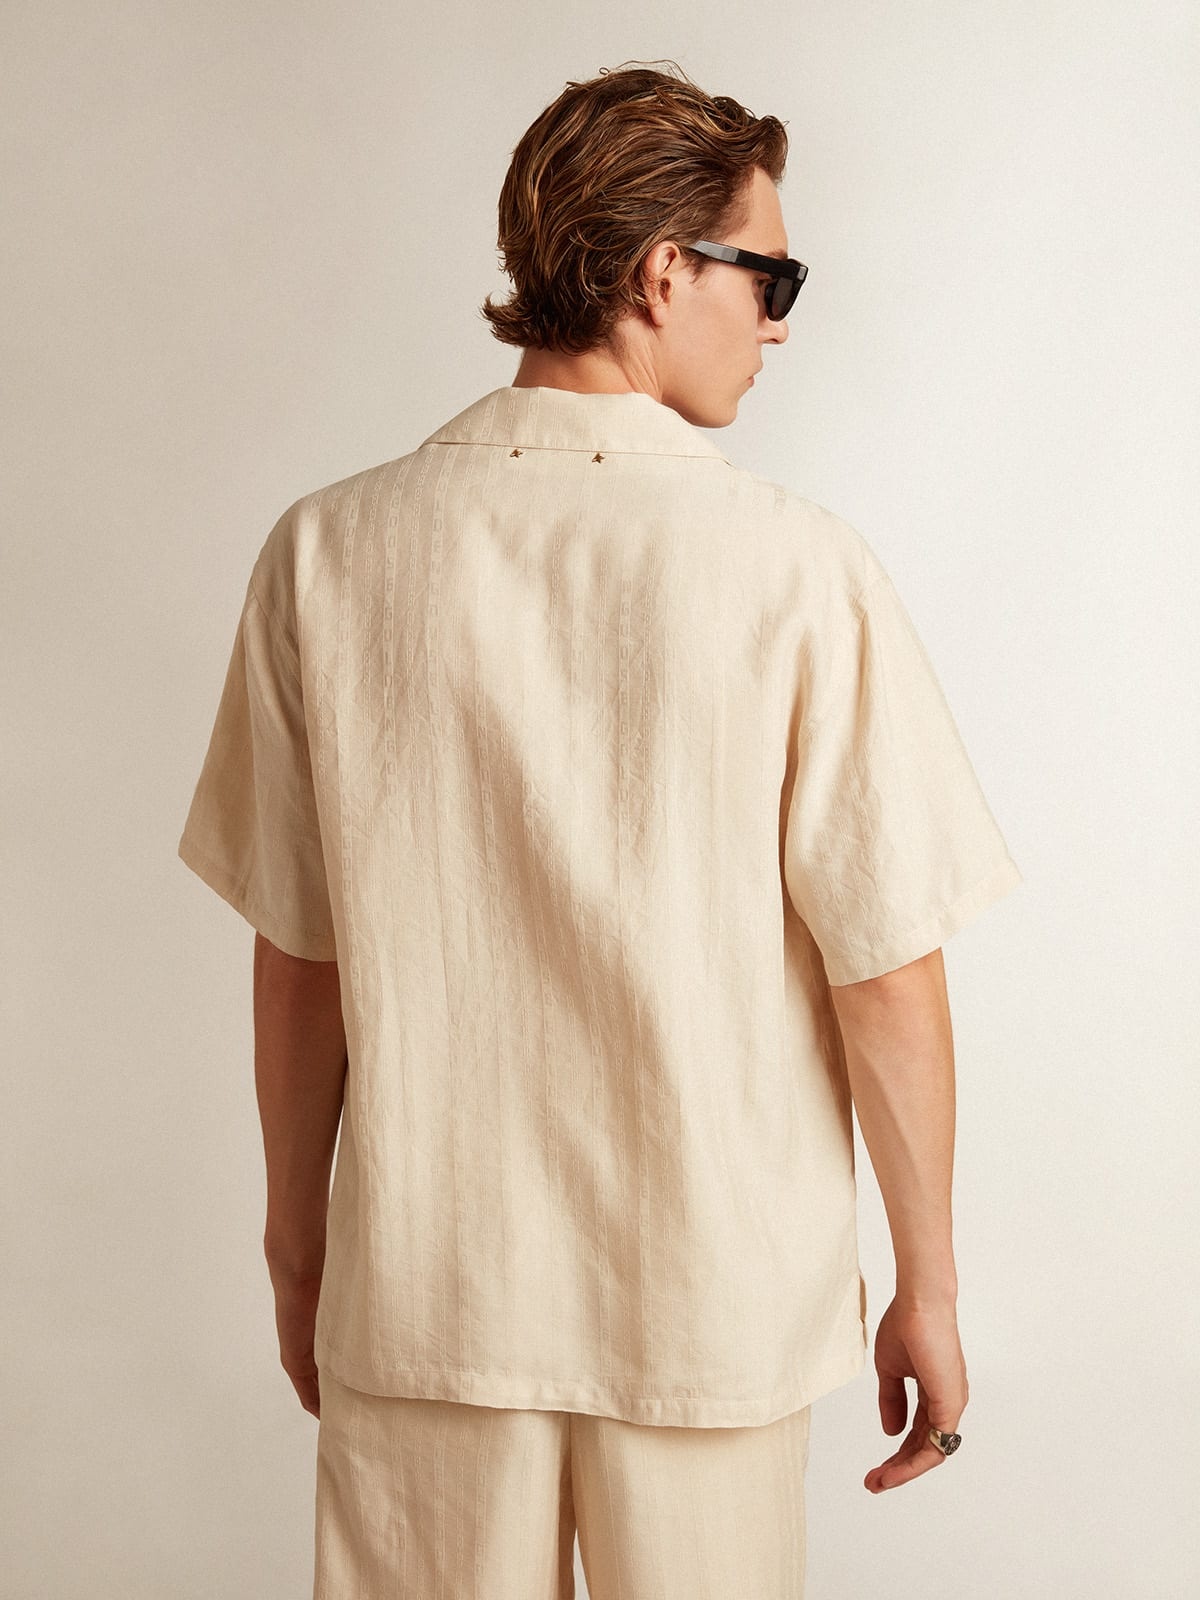 Short-sleeved shirt in parchment-colored linen - 4